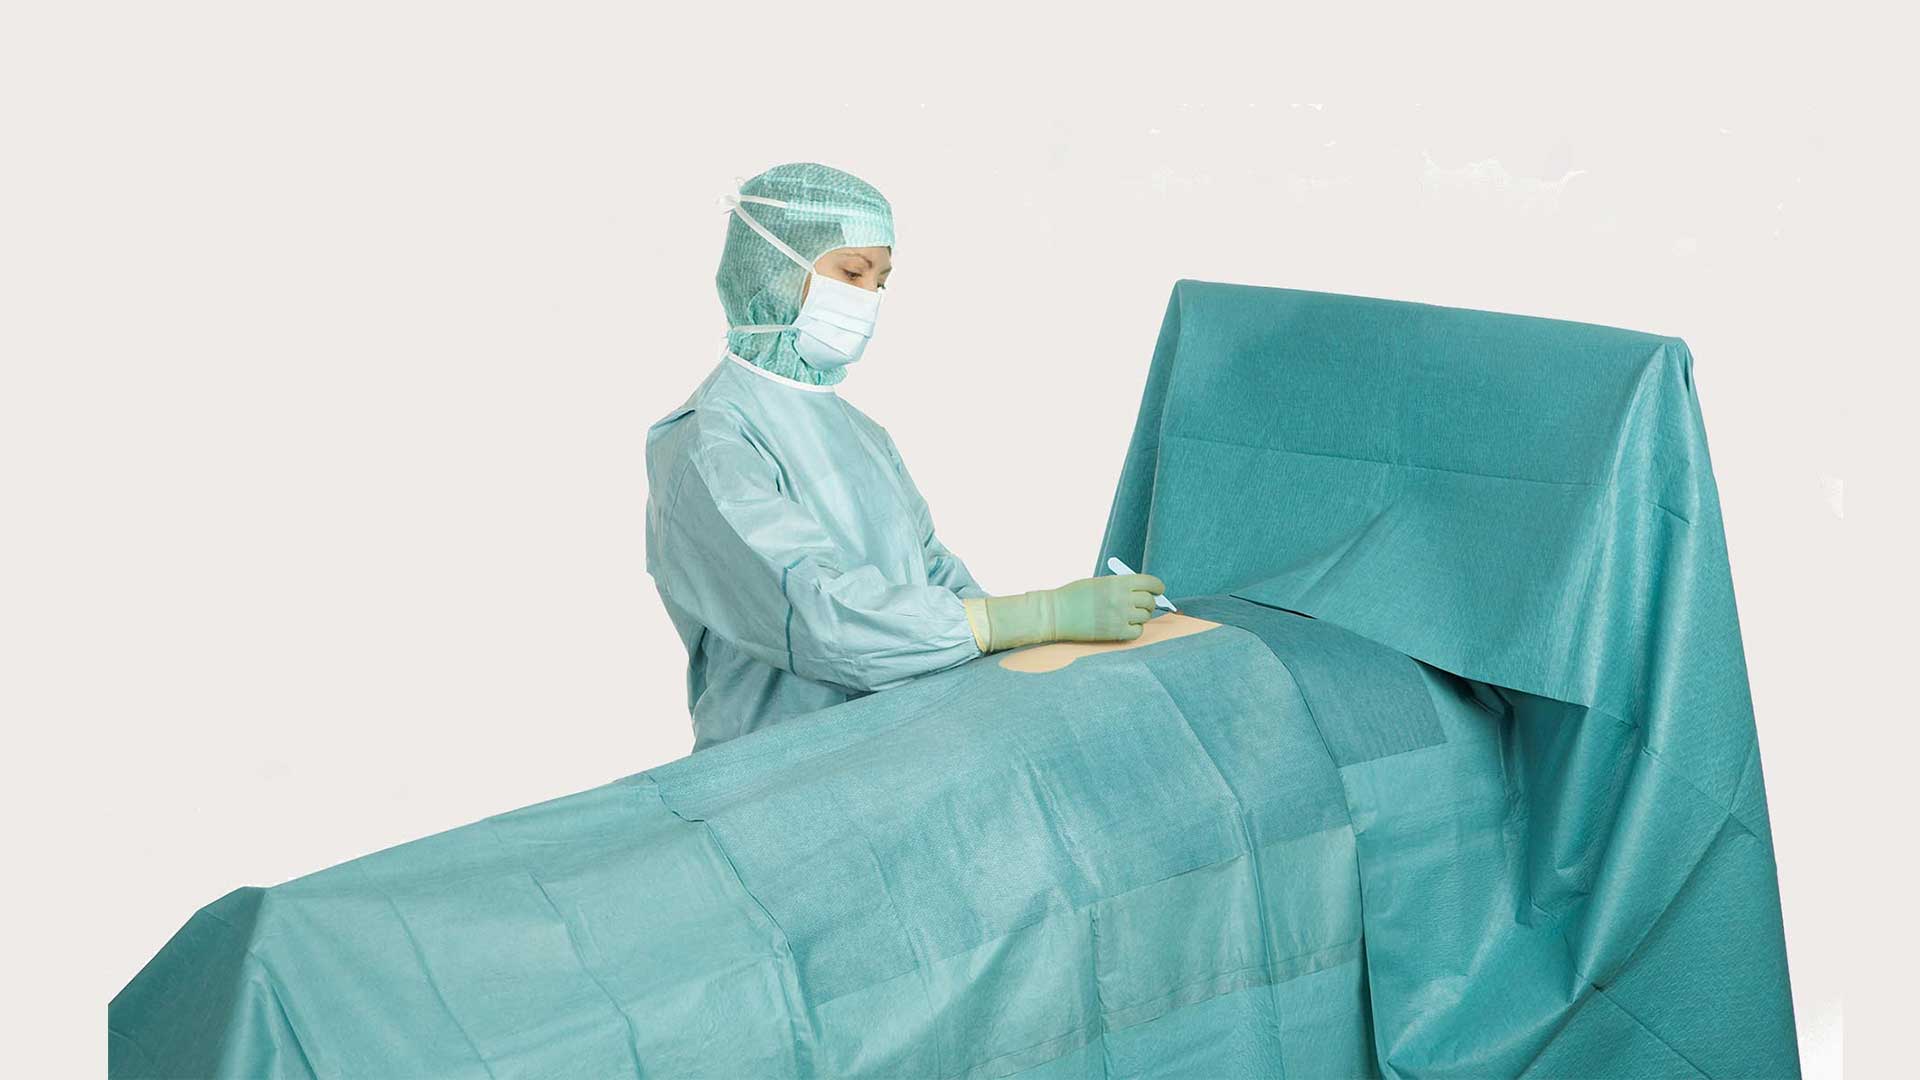 Surgical Drapes and Gowns Market 2023 Top Companies Analysis: Cardinal  Health, 3M, Thermo Fisher Scientific, Steris Corporation